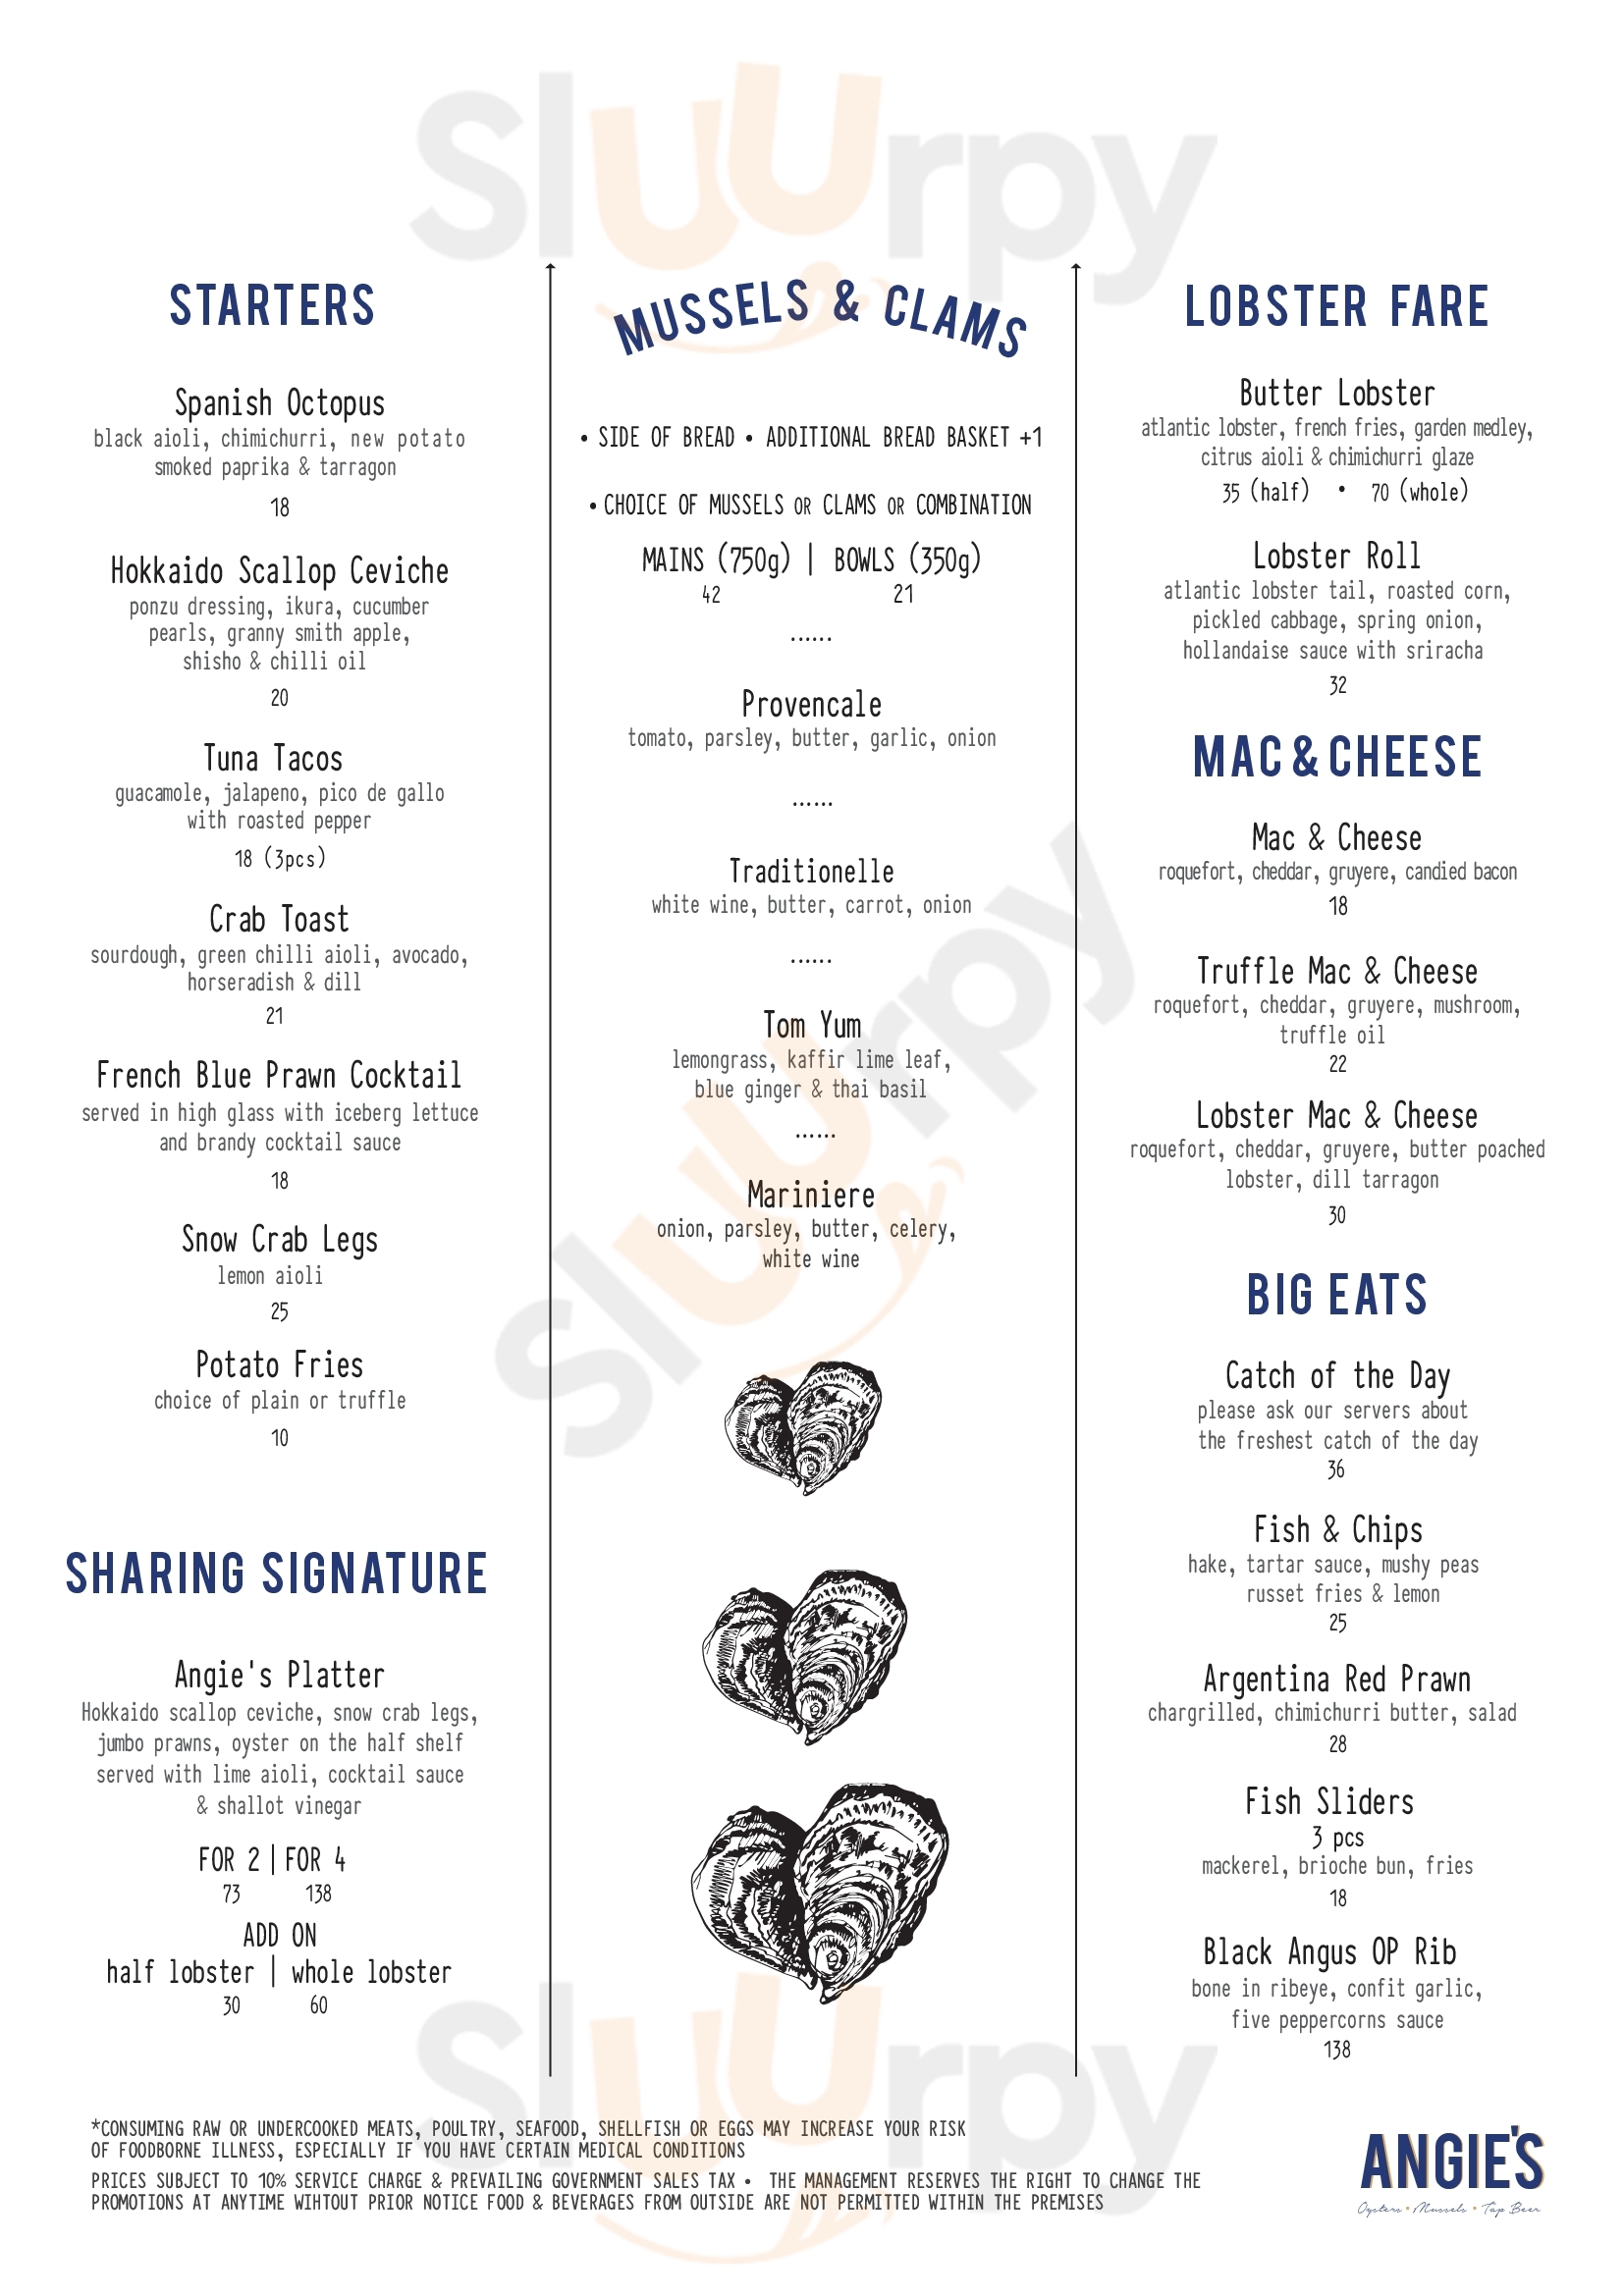 Angie's Oyster Bar & Grill Singapore Menu - 1